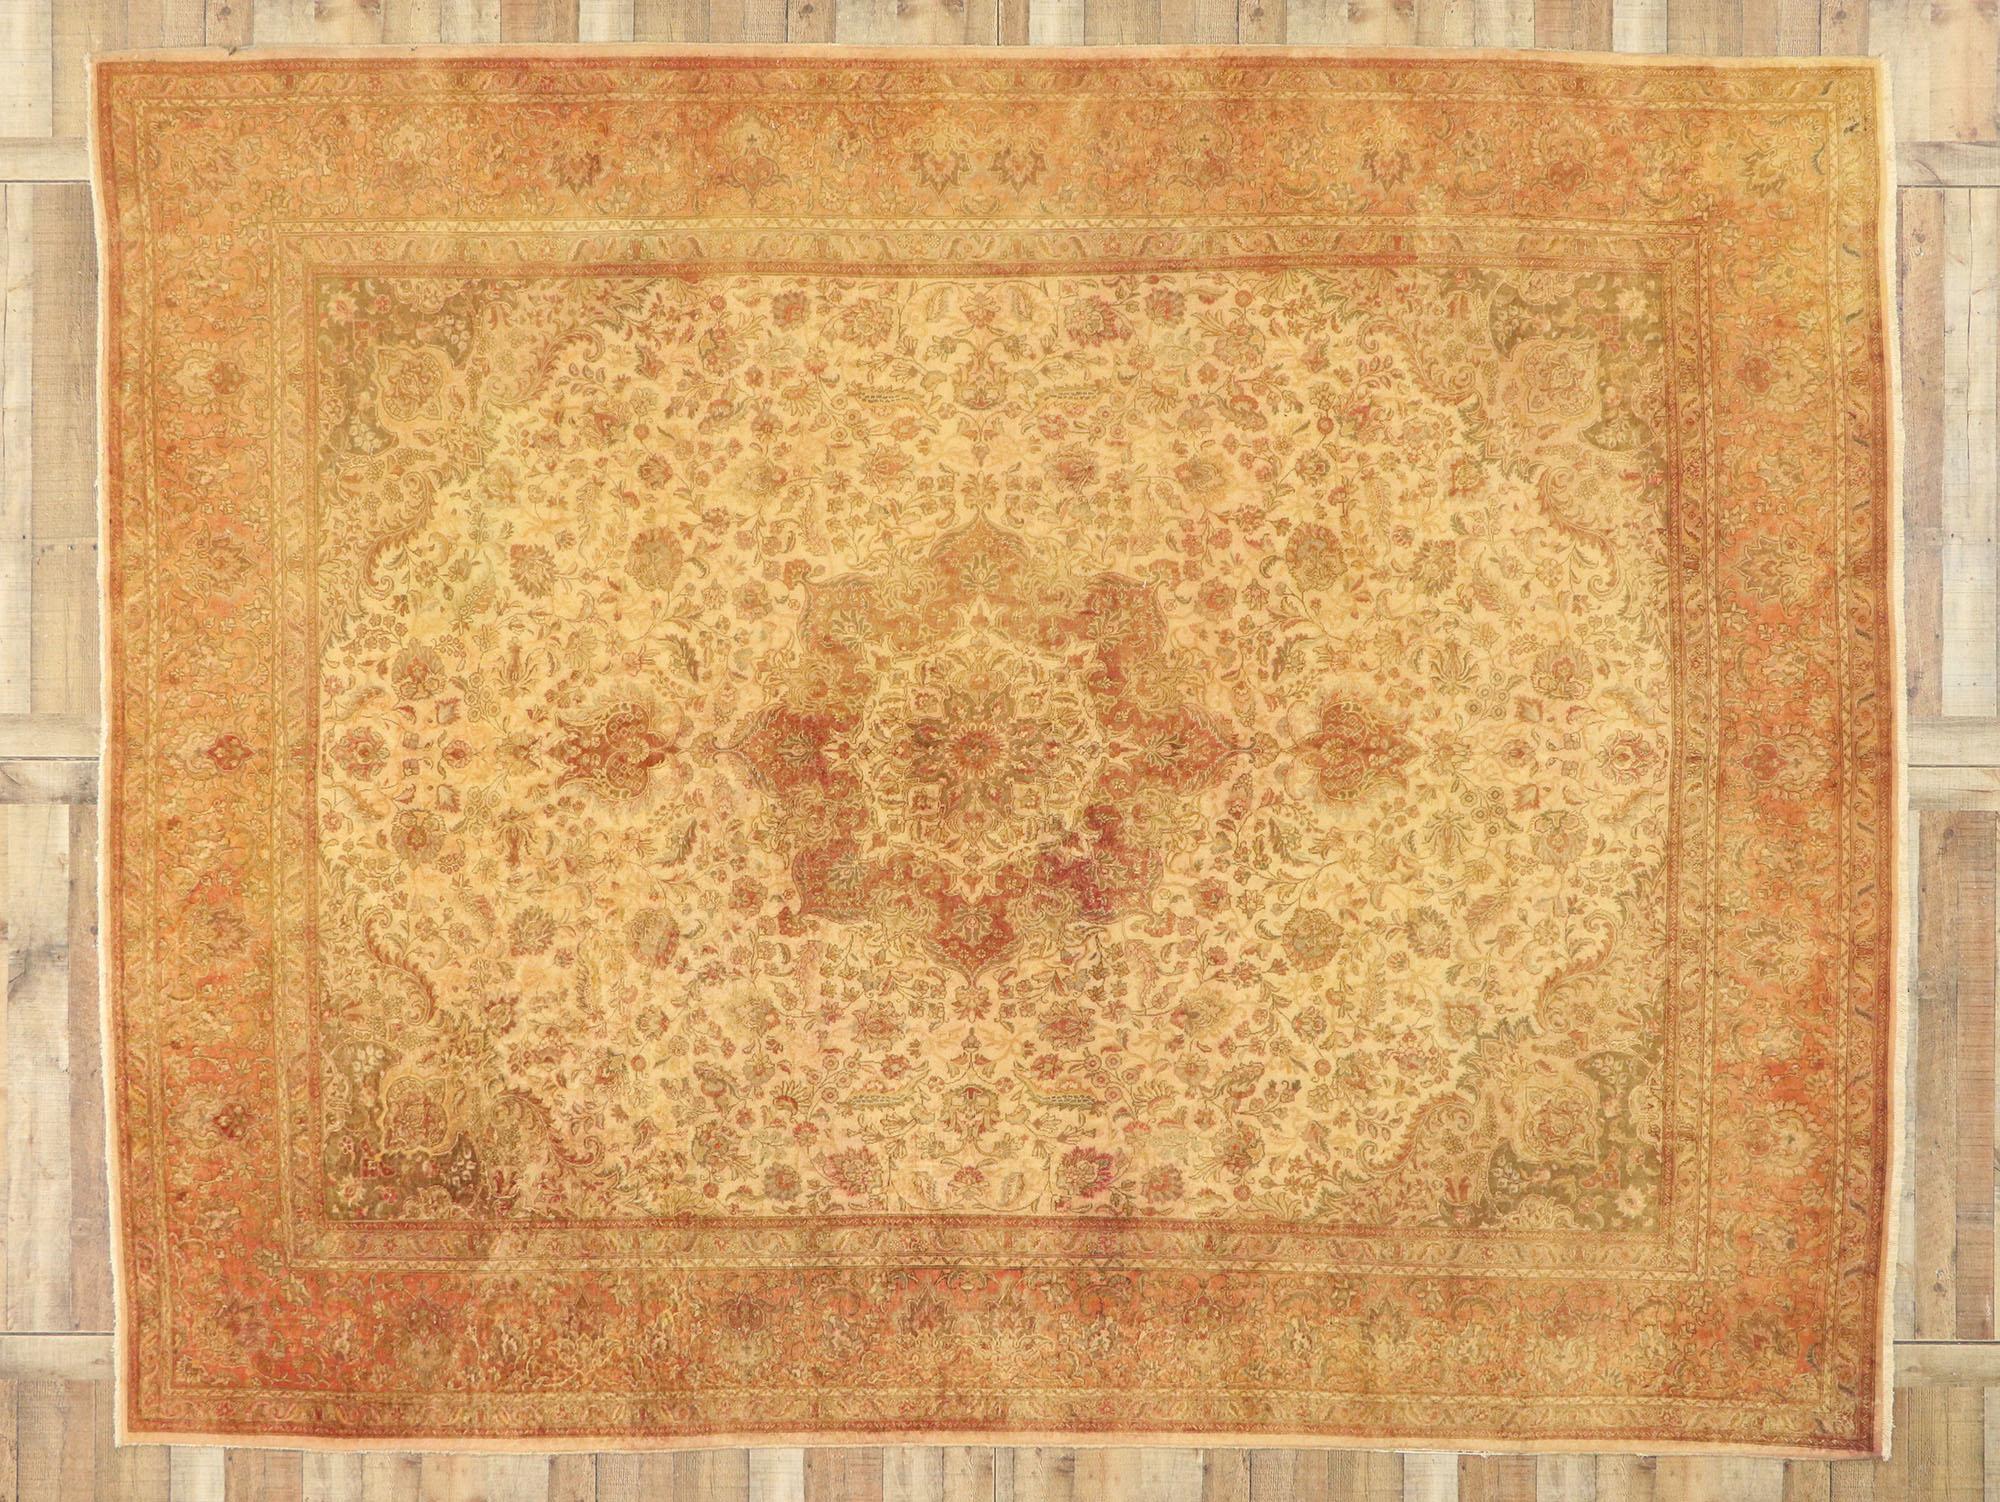 20th Century Vintage Persian Tabriz Rug with Rustic Mediterranean Tuscan Style For Sale